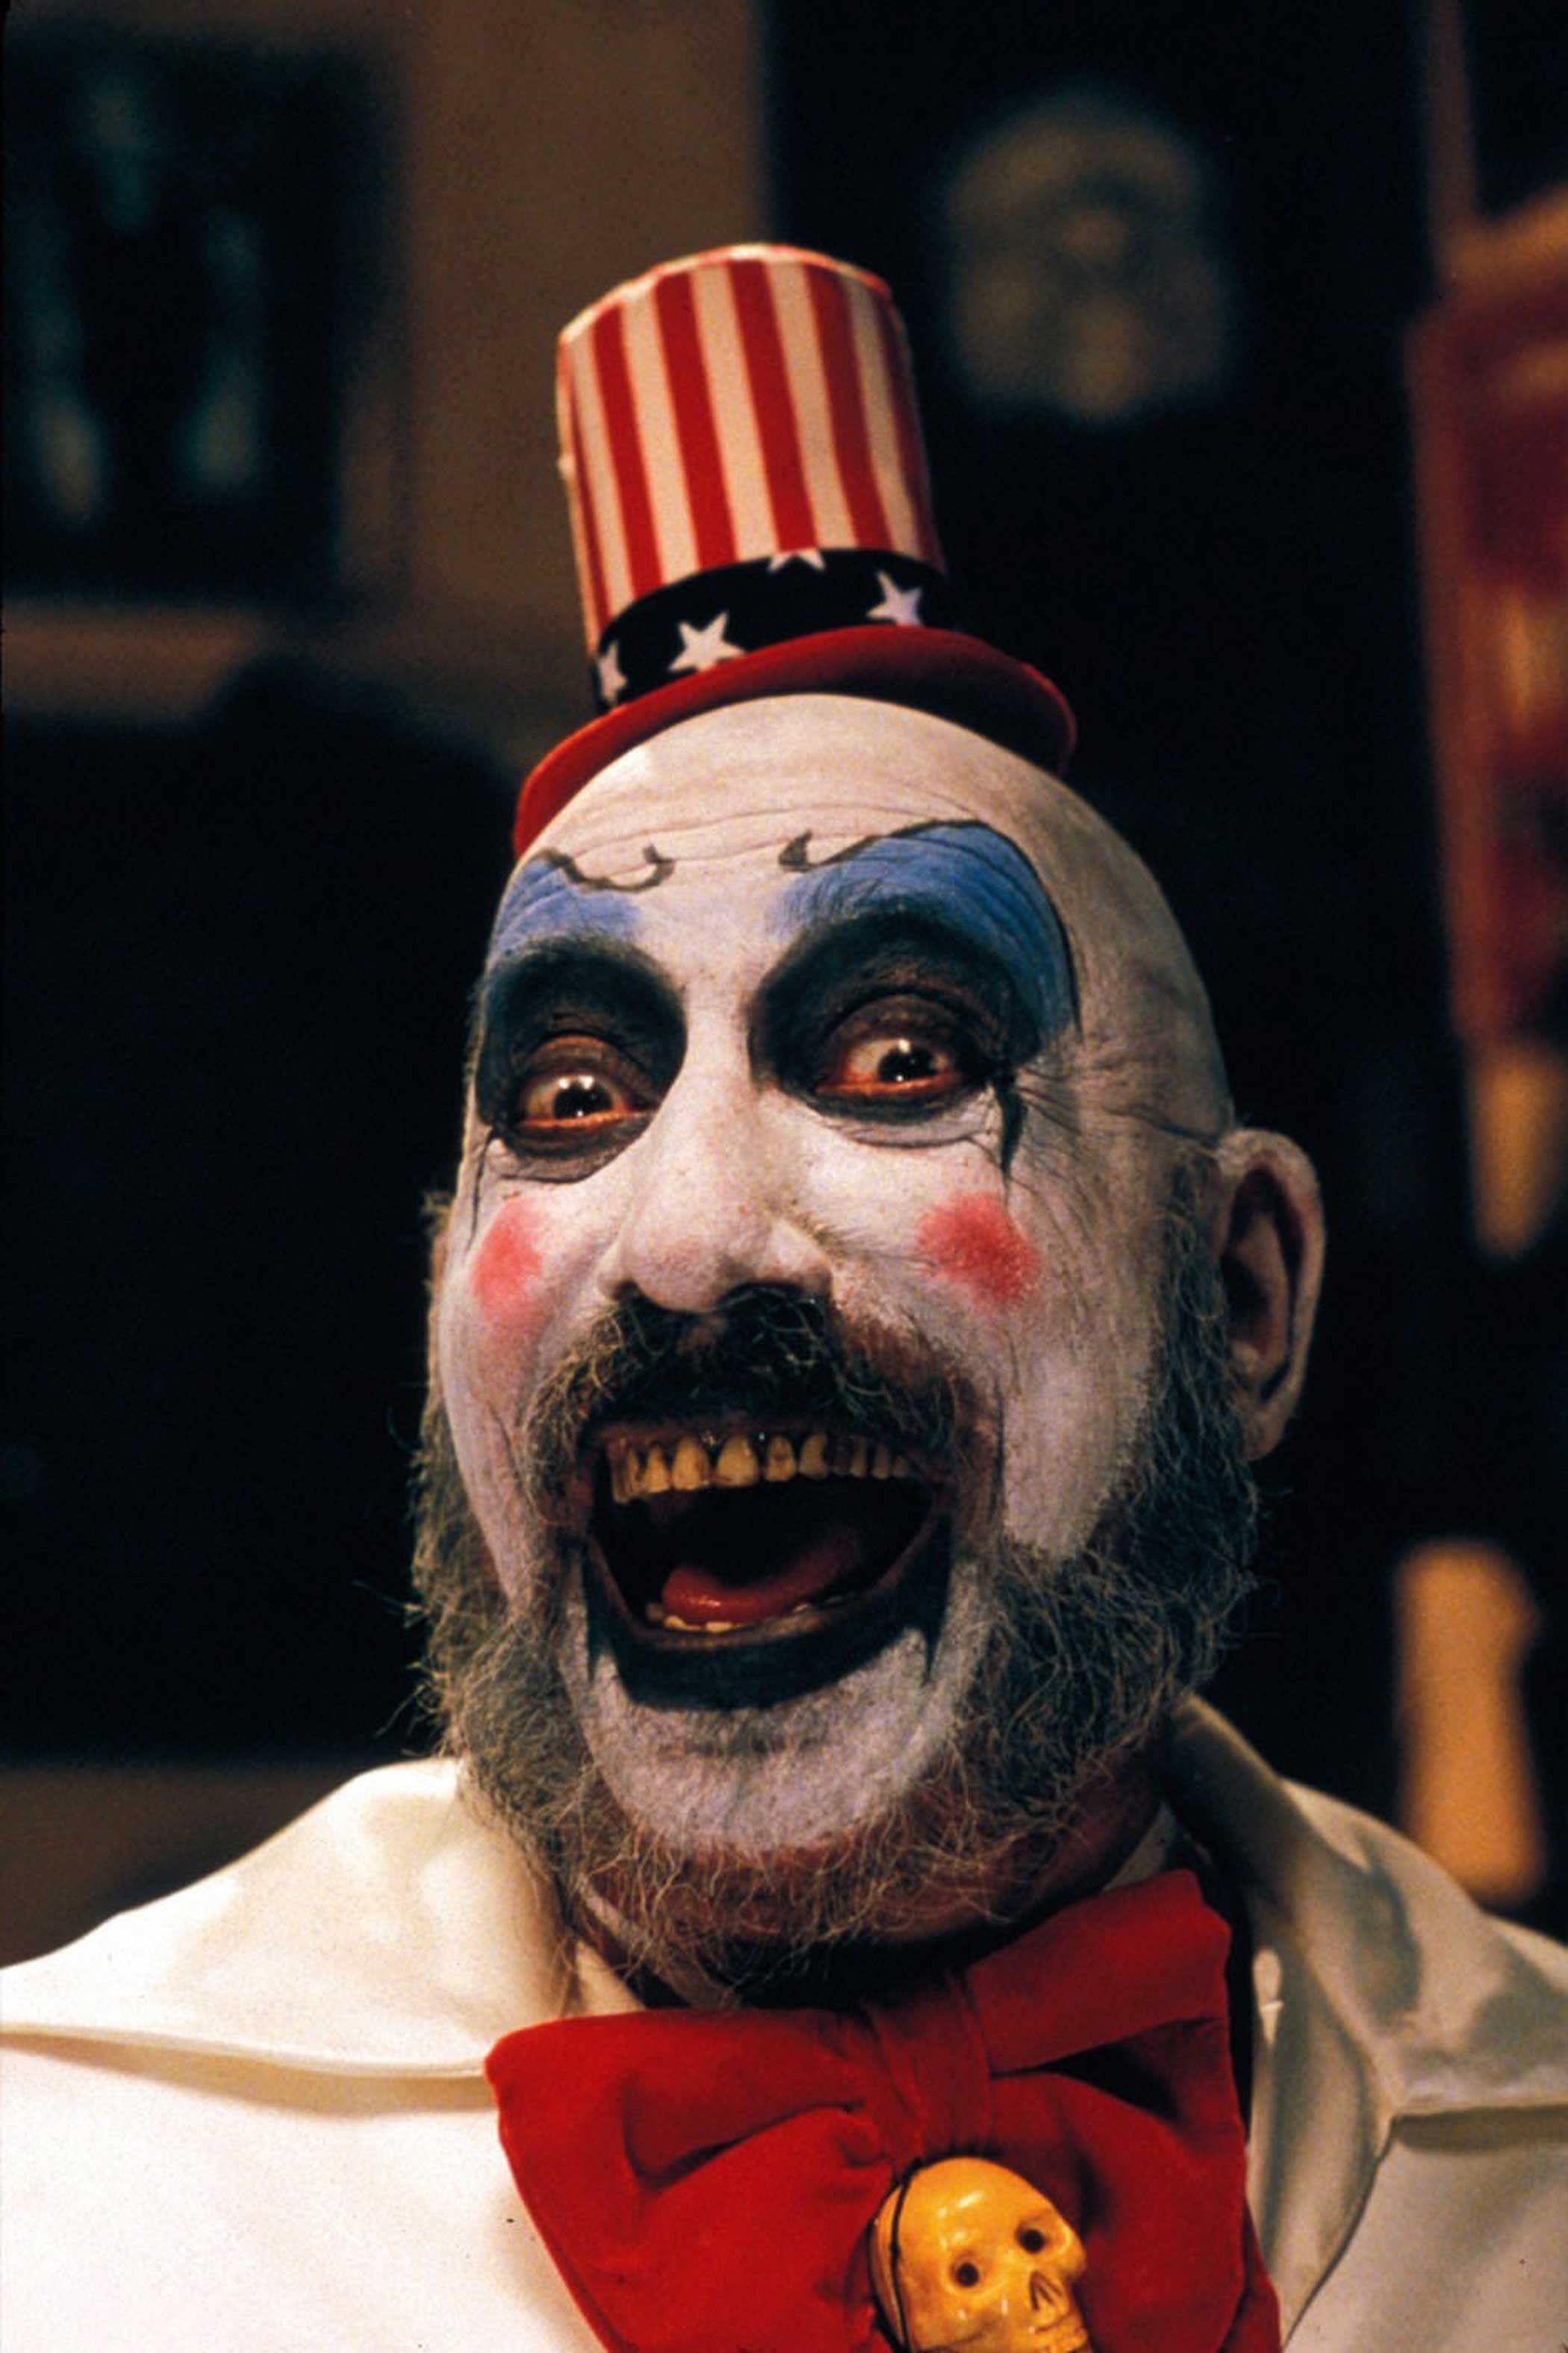 House of 1000 Corpses, 2003 The character Captain Spaulding is based on real life serial killer and rapist John Wayne Gacy, who fascinated director Rob Zombie. Gacy, also known as the Killer Clown, once worked as a clown named Pogo at children's parties and charitable events. In the film, Spaulding also sells fried chicken, just like his real life counterpart Gacy, who managed three KFC restaurants.